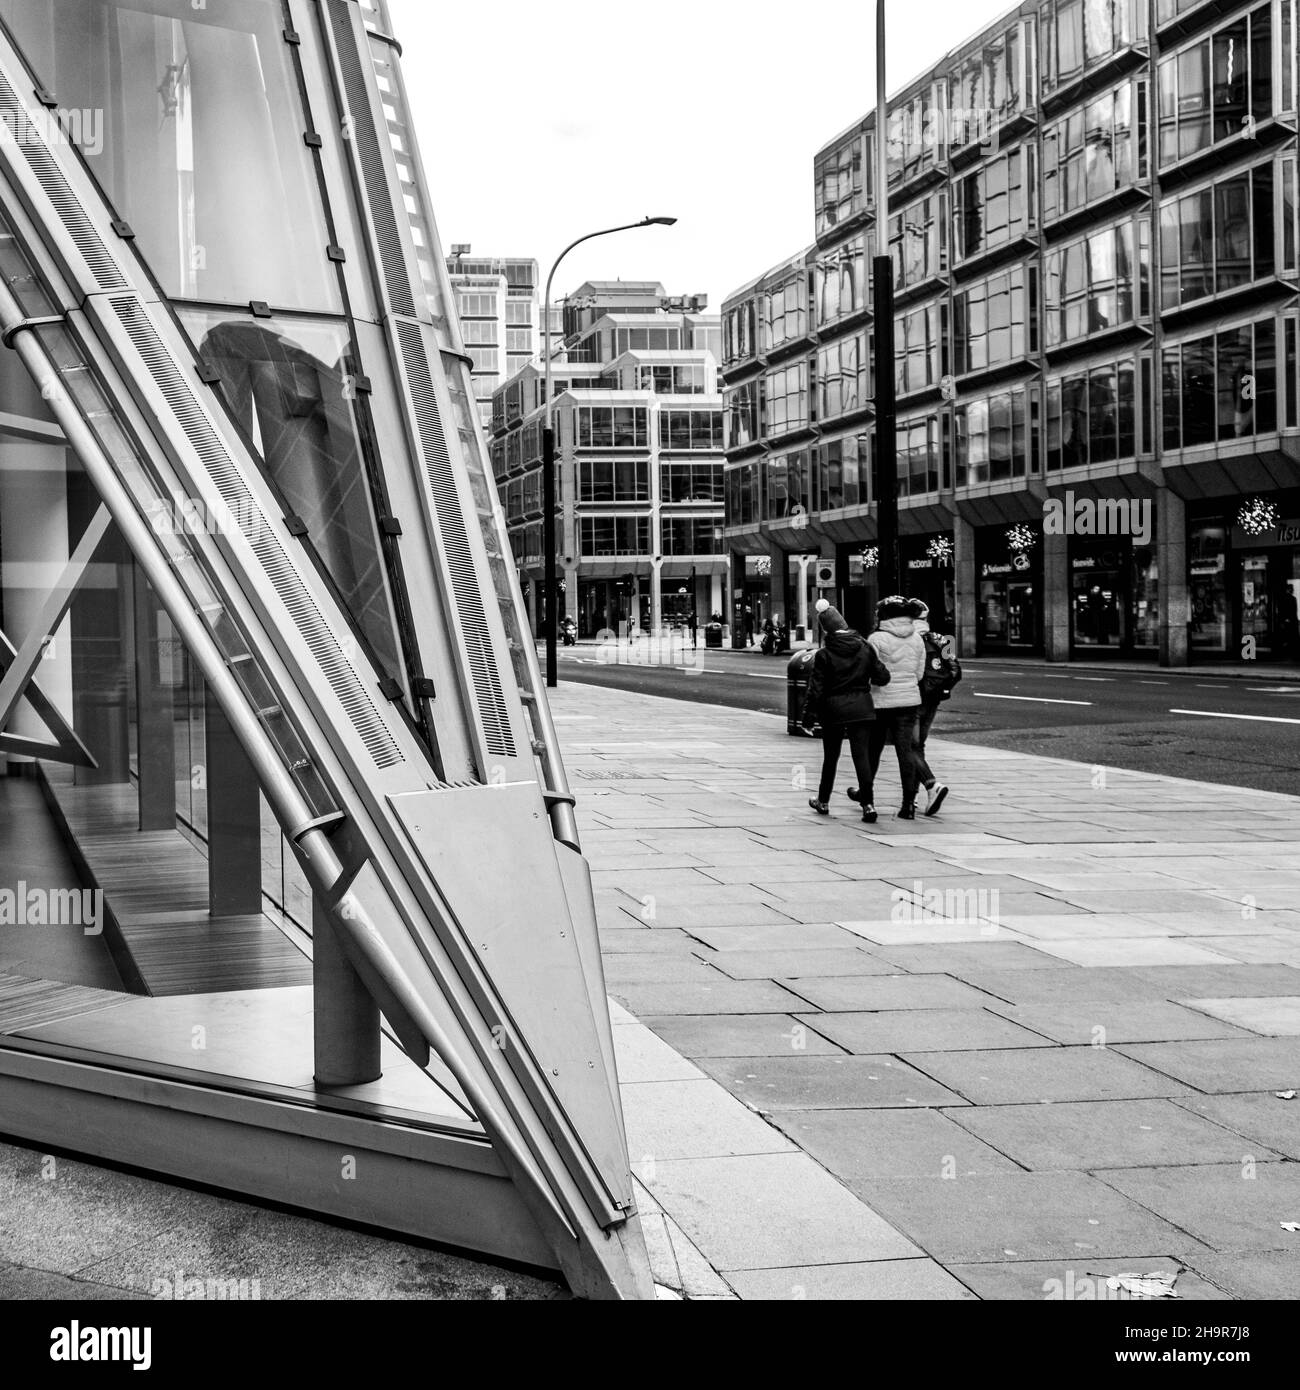 Central London UK November 21 2021, Small Group Of People Walking Past Cardinal Place Victoria Street London Architectural Feature Stock Photo